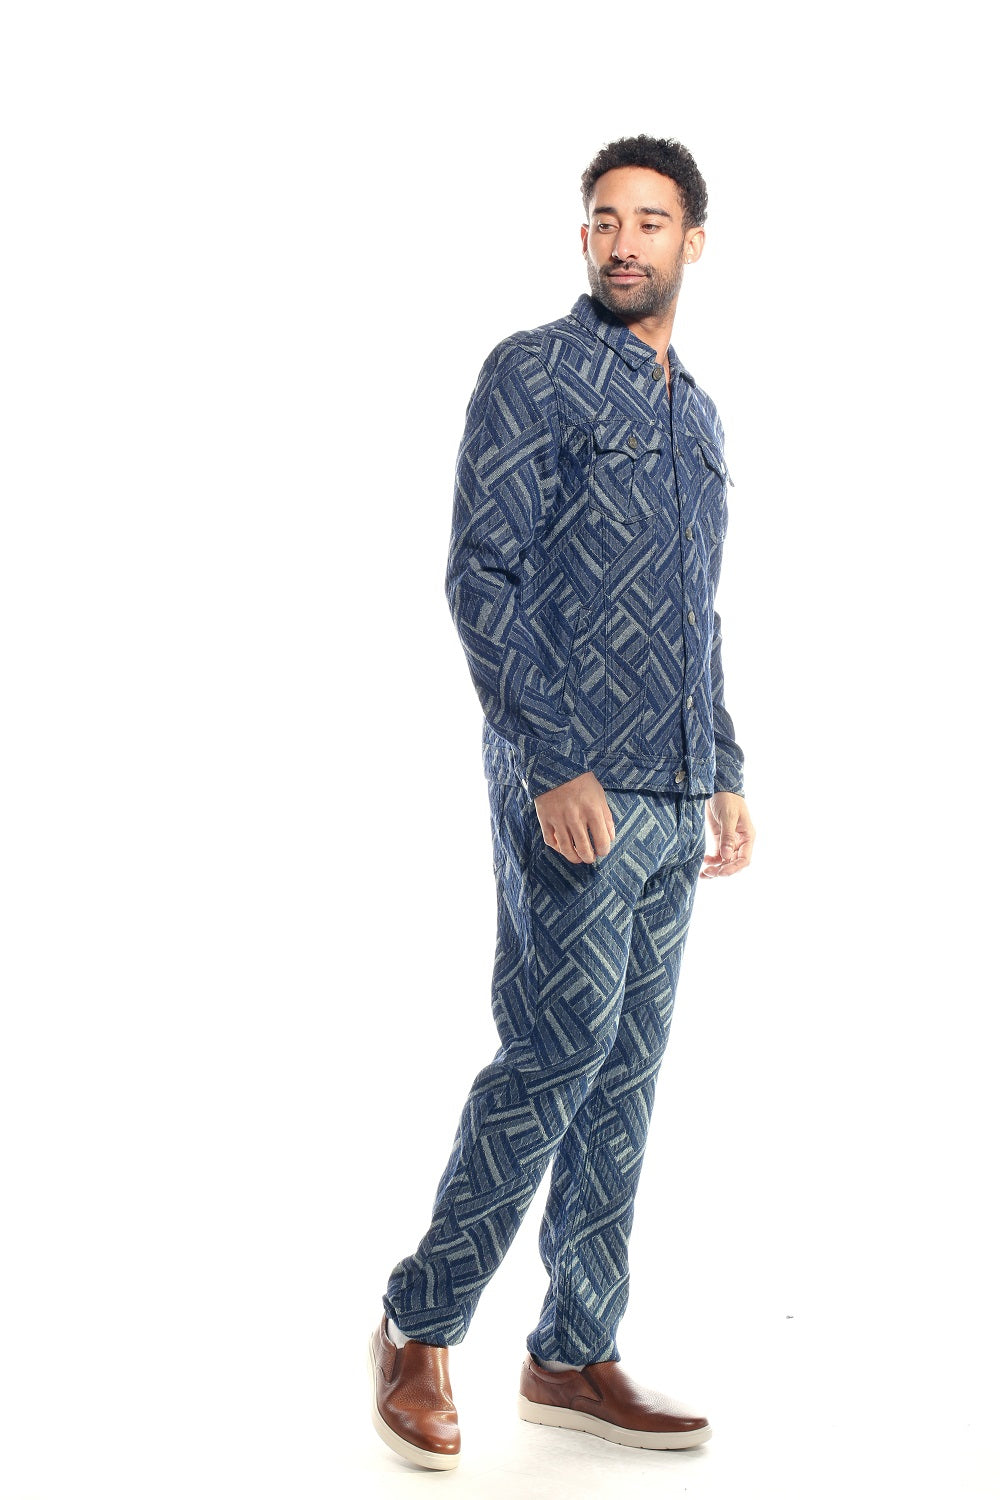 FULL PATTERNED DENIM JACKET PANT OUTFIT